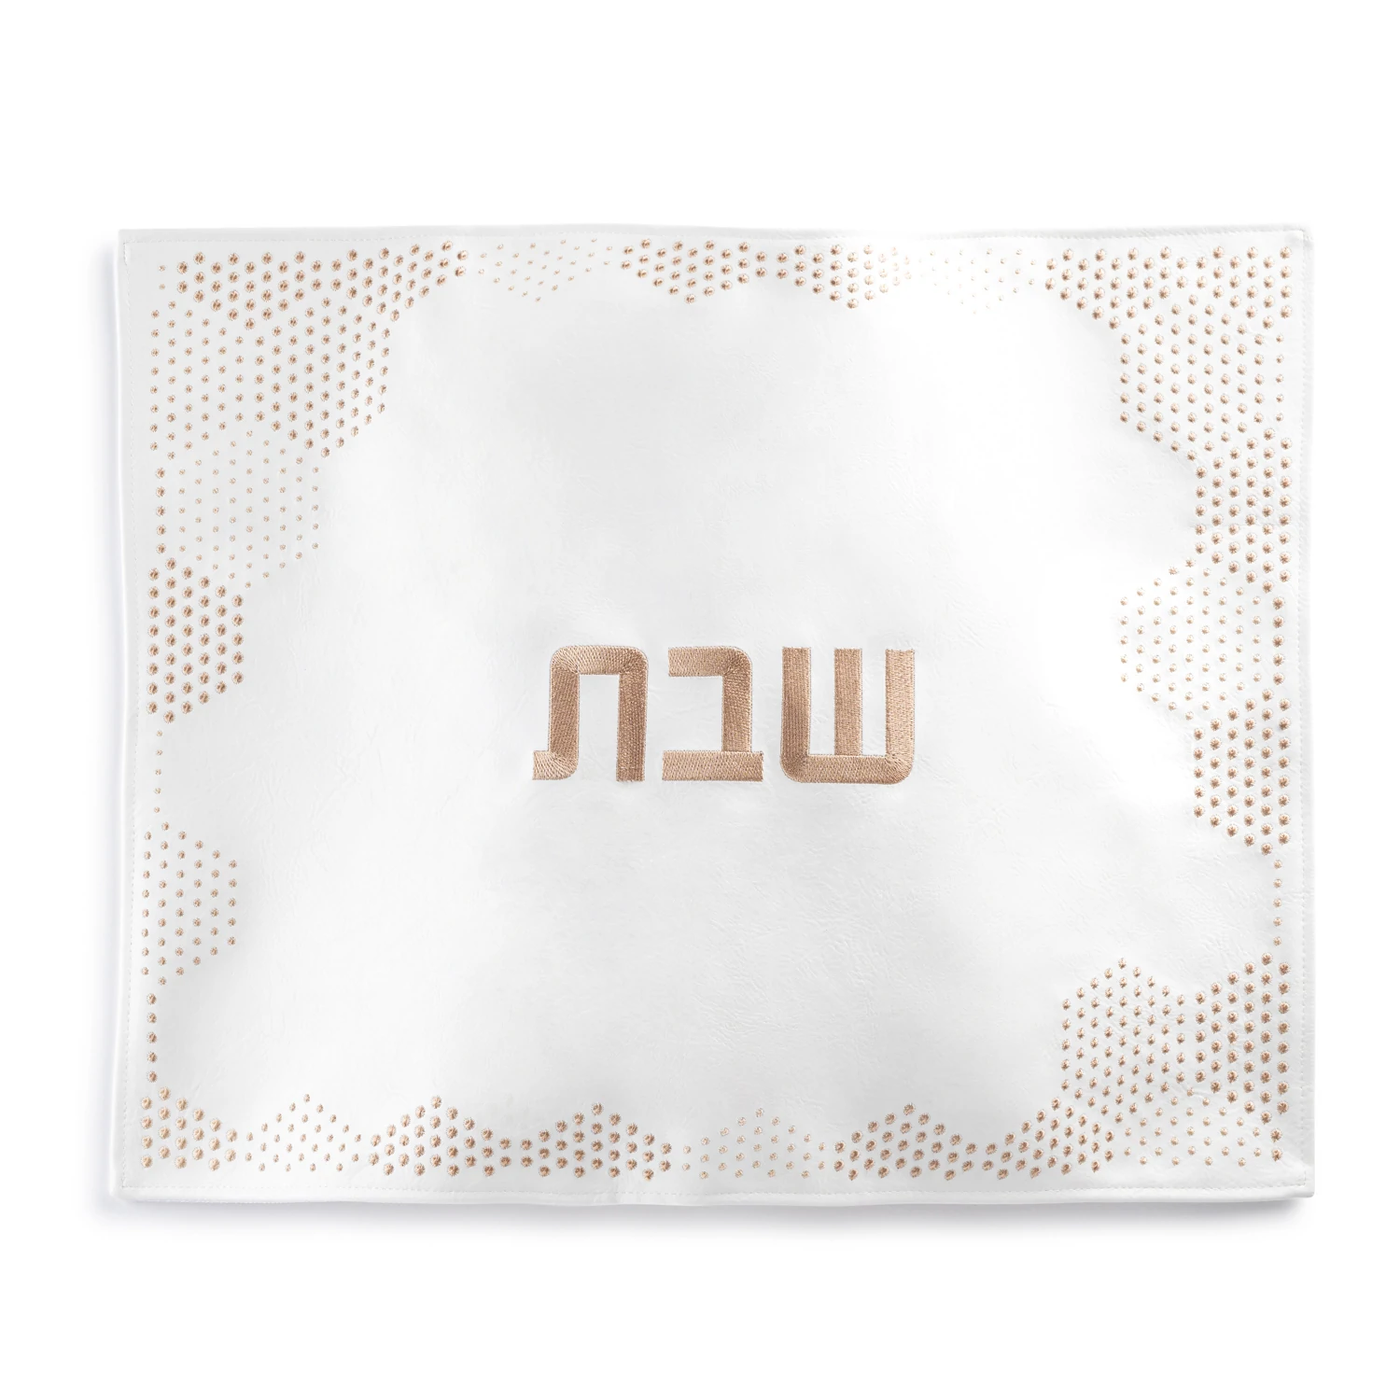 Hexagon Dot Border Challah Cover - Gold - Set With Style